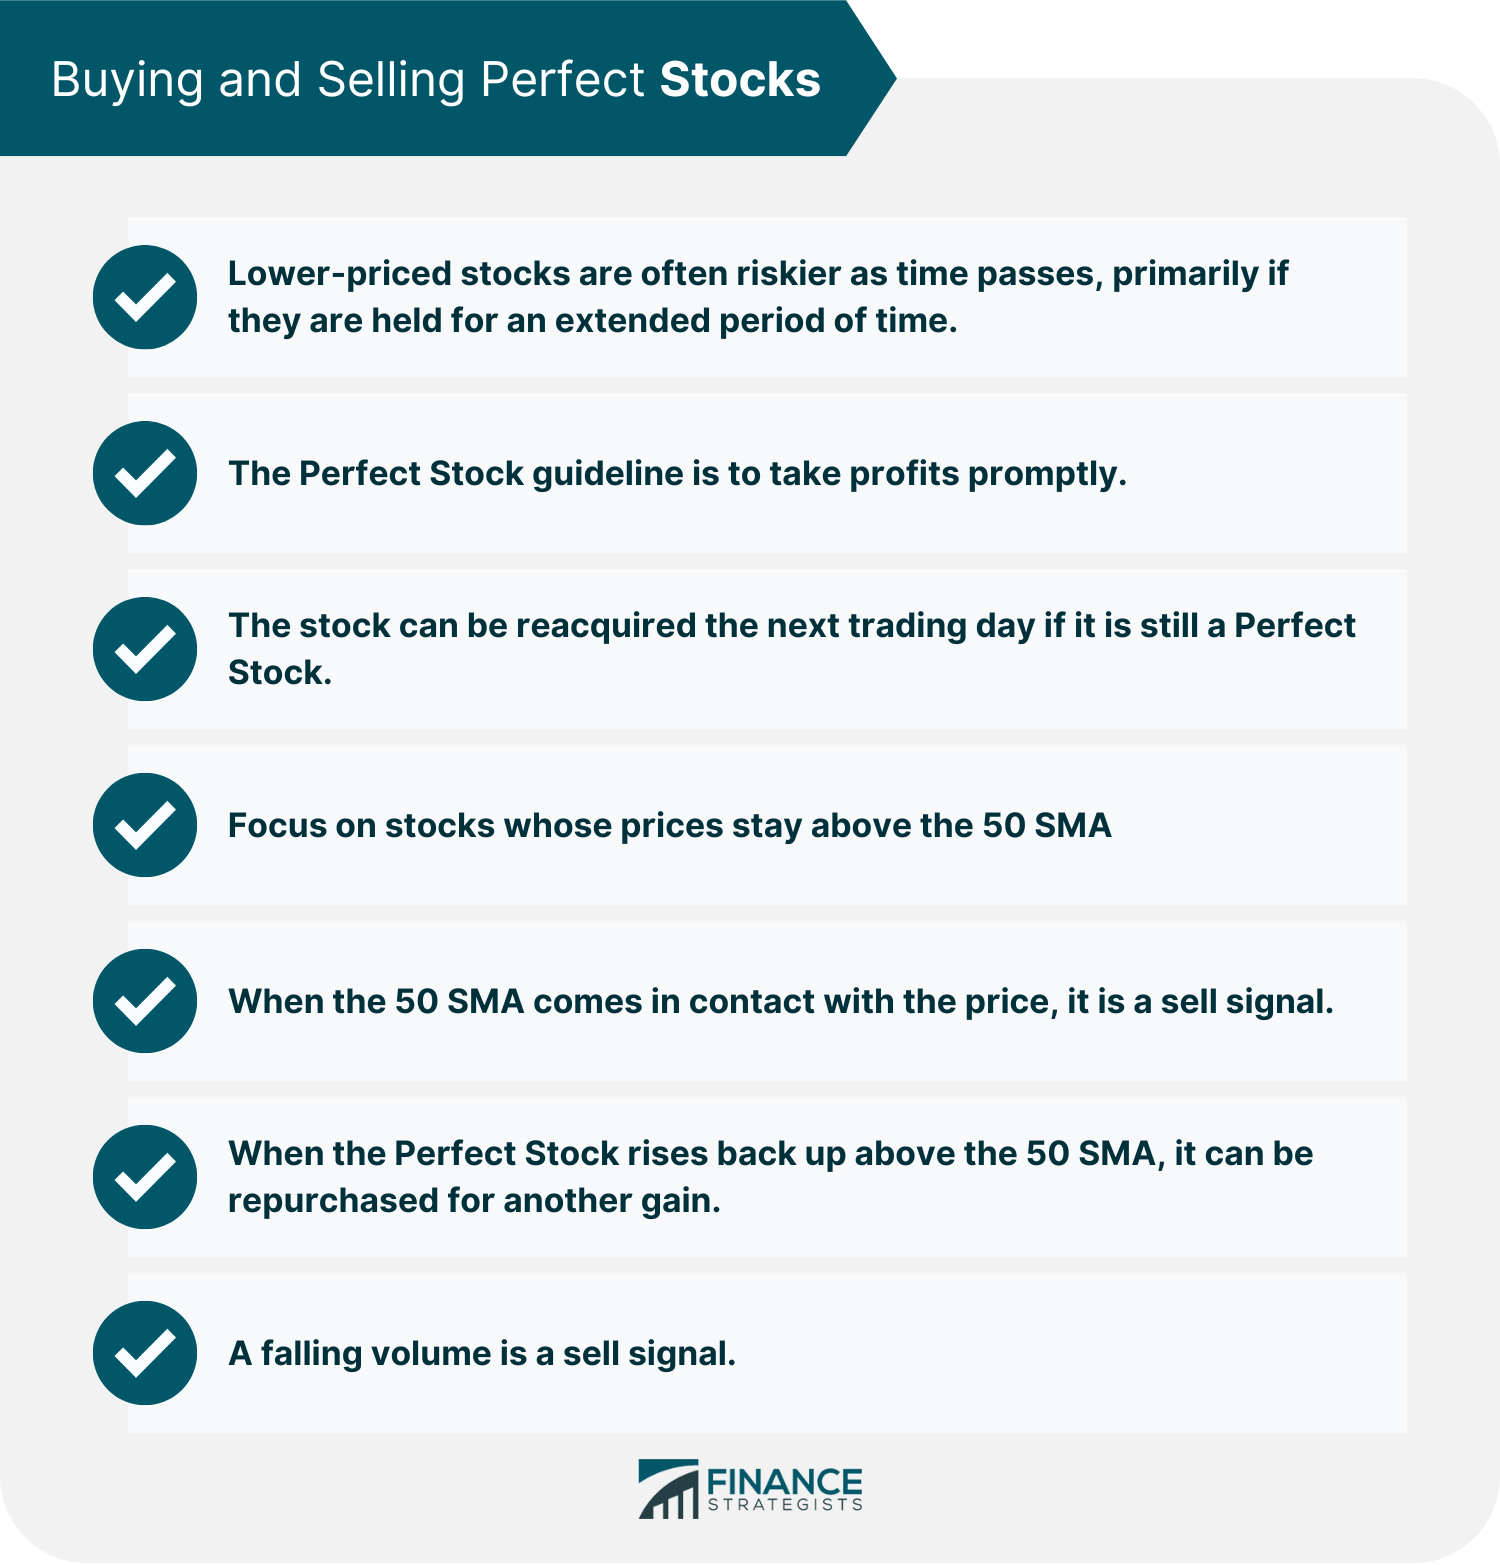 Buying and Selling Perfect Stocks